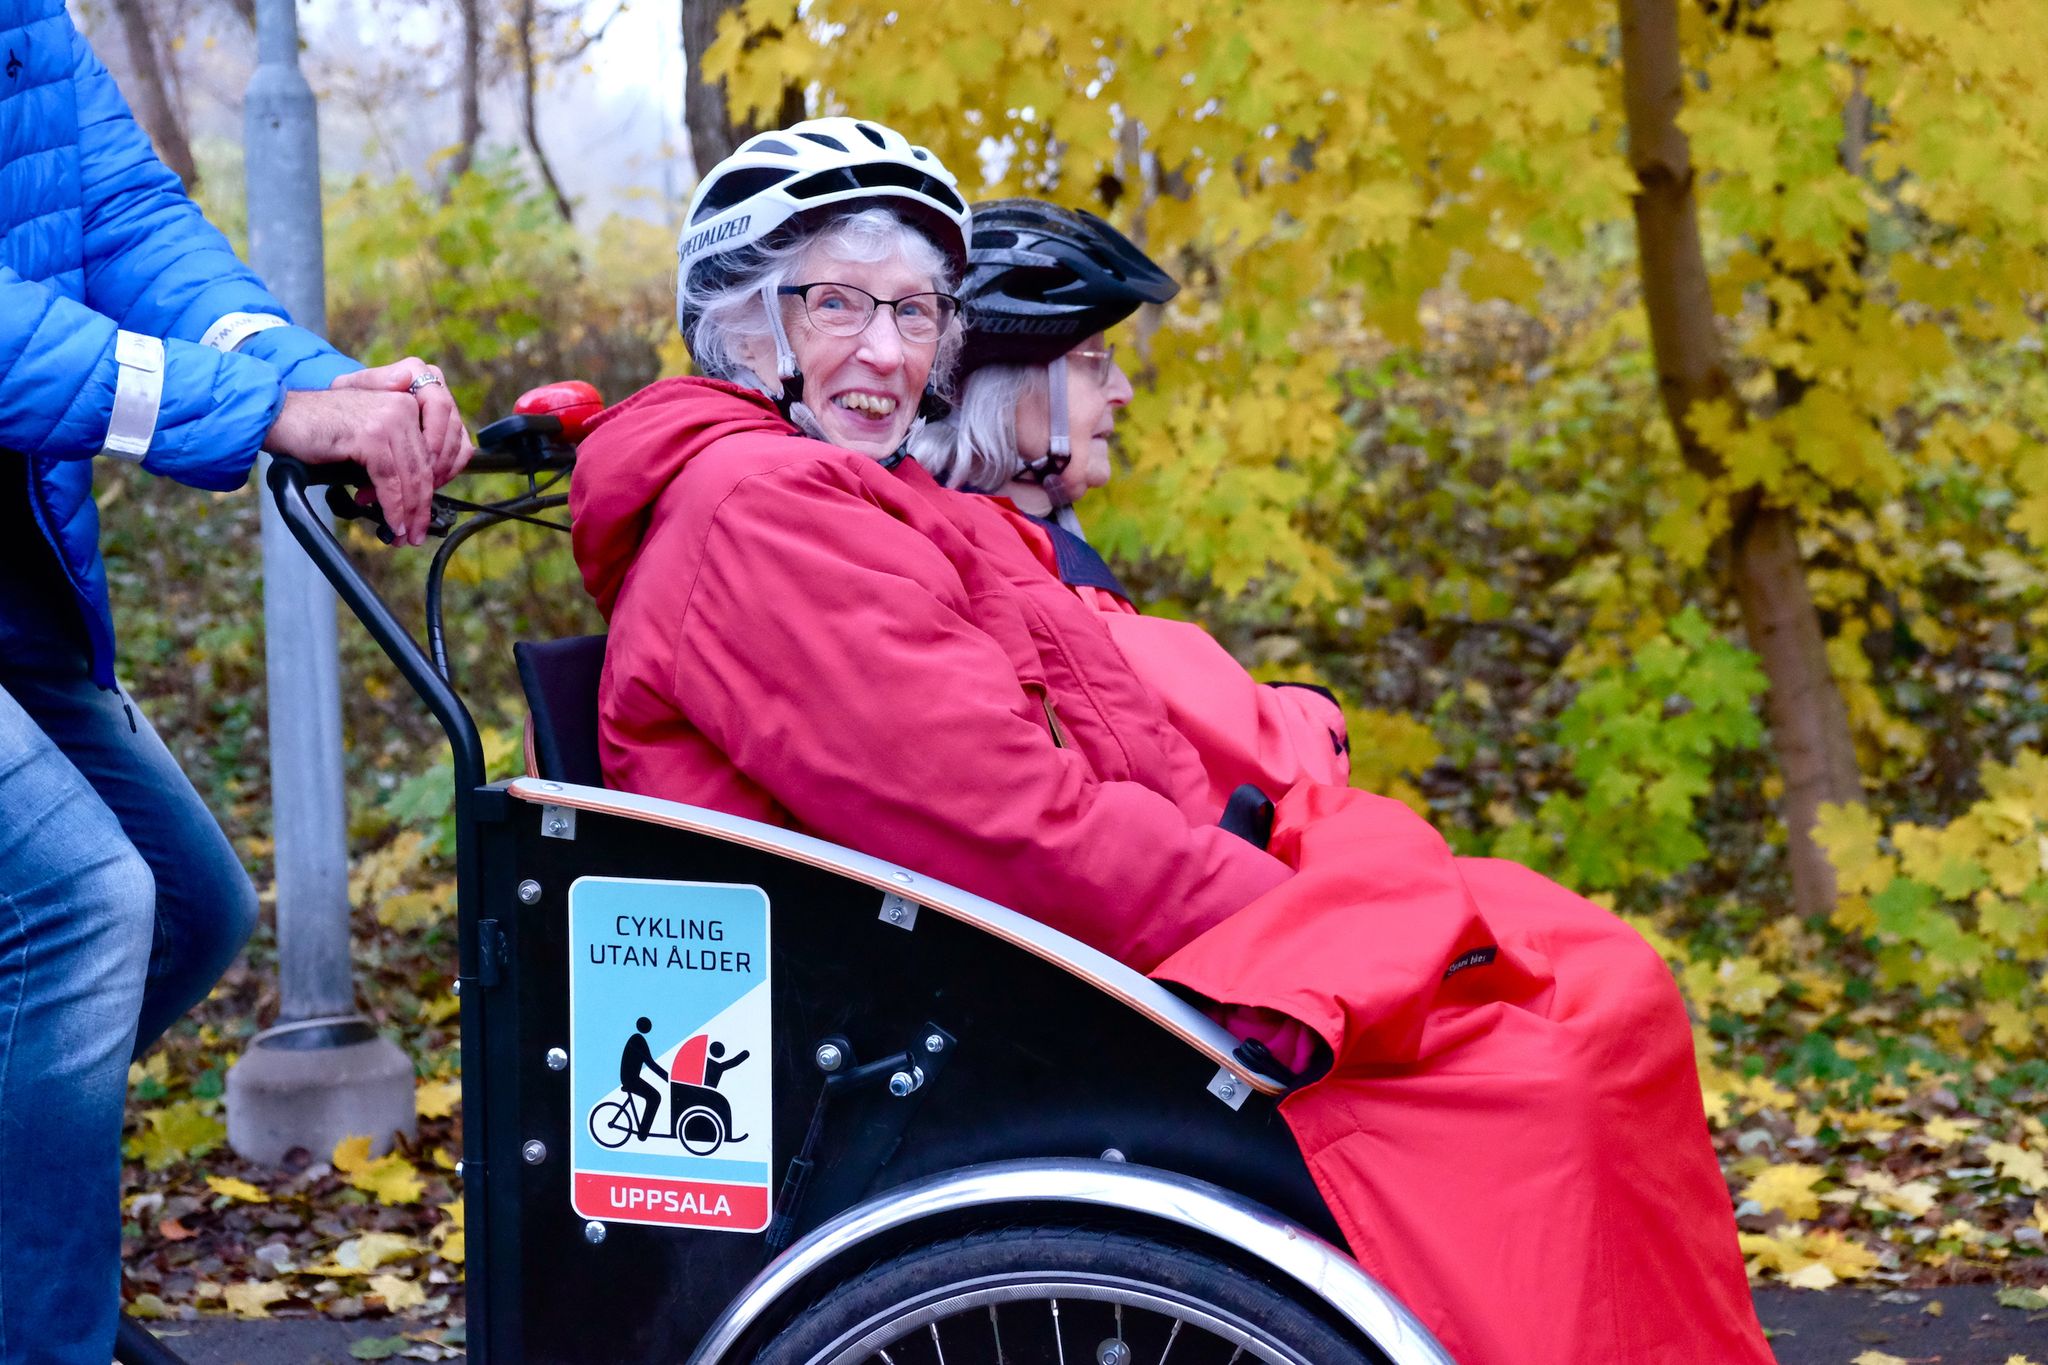 Cycling Without Age trishaw rides for the elderly